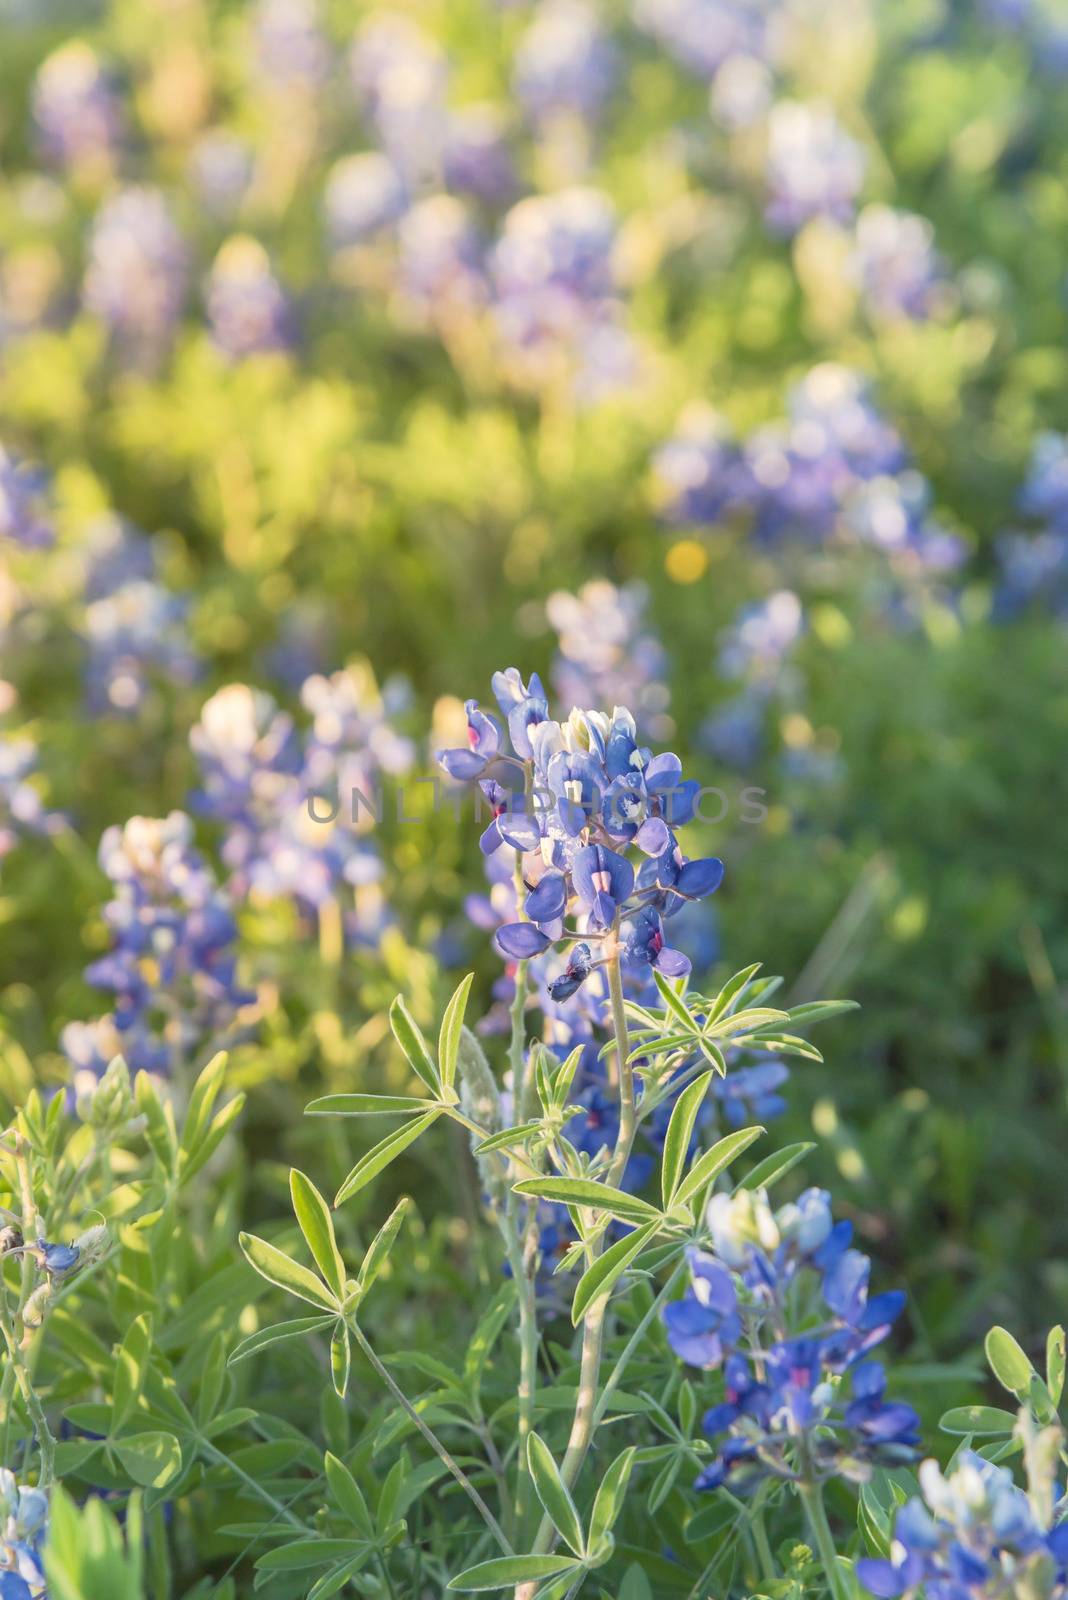 Beautiful bush of Bluebonnet full blossom at sunset during springtime near Dallas, Texas, USA. This is the official state flower of Texas. Wildflower blooming background